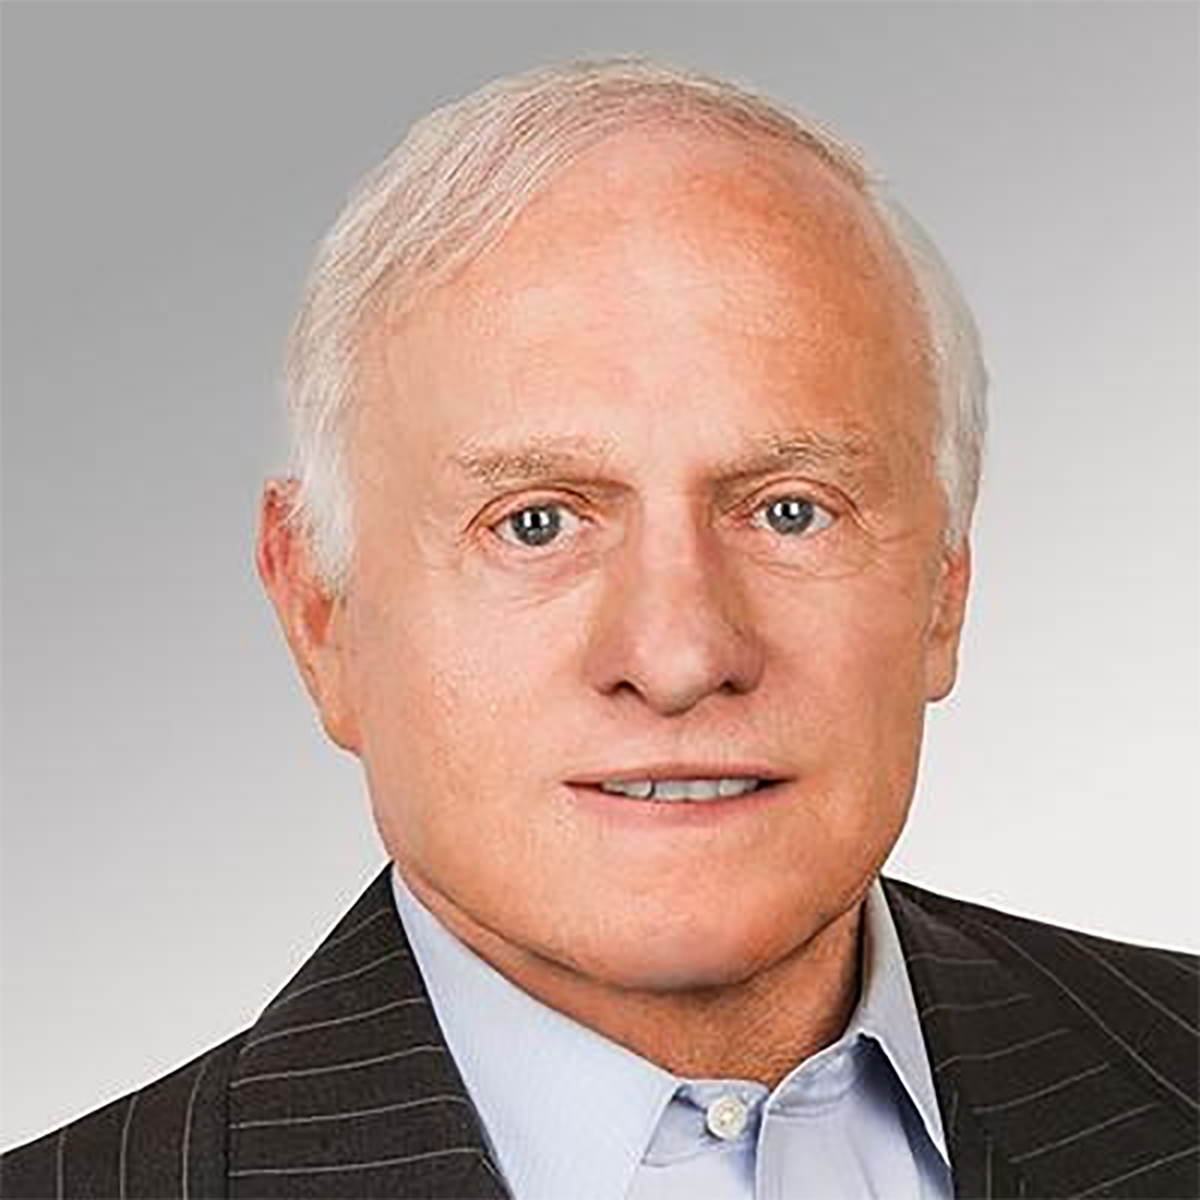 PHOTO: Peter W. Smith, a longtime GOP operative who died in May 2017, is seen here in his undated Twitter profile photo.